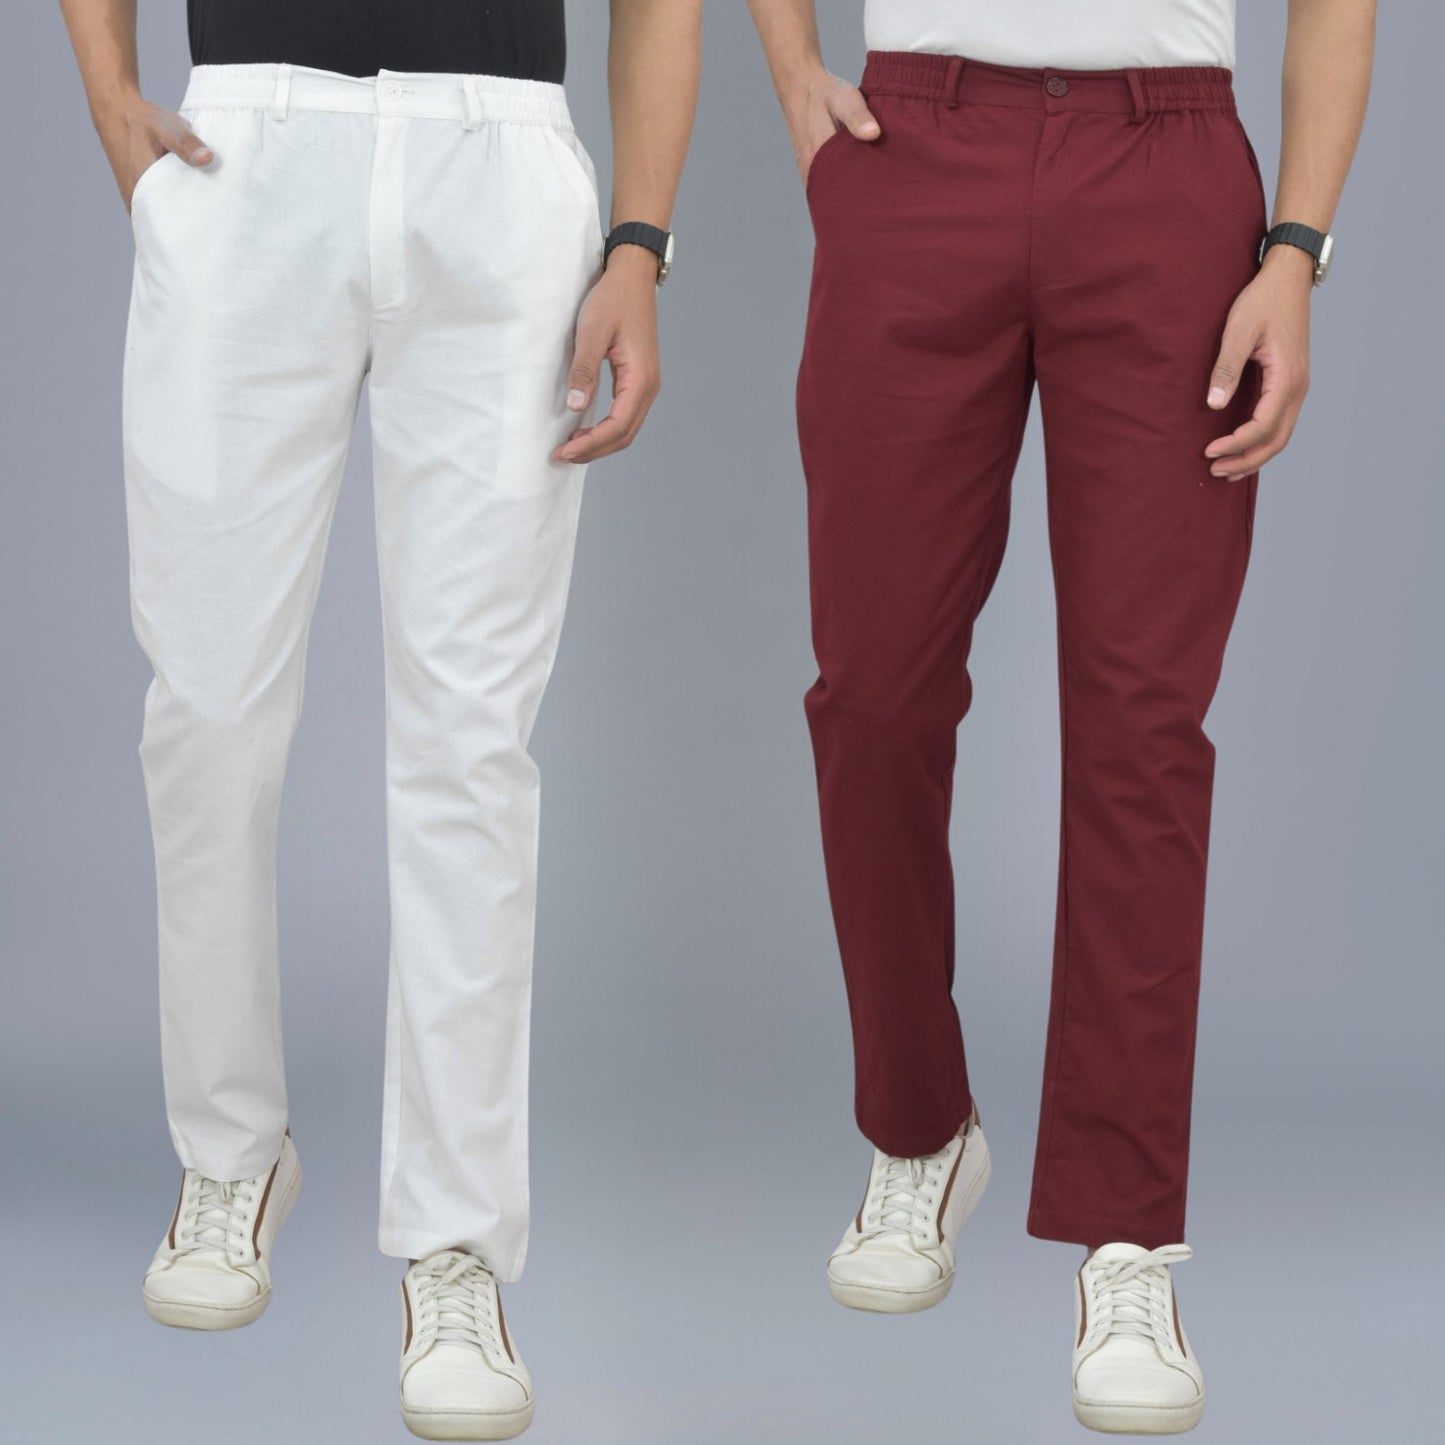 Pack Of 2 White And Wine Airy Linen Summer Cool Cotton Comfort Pants For Men